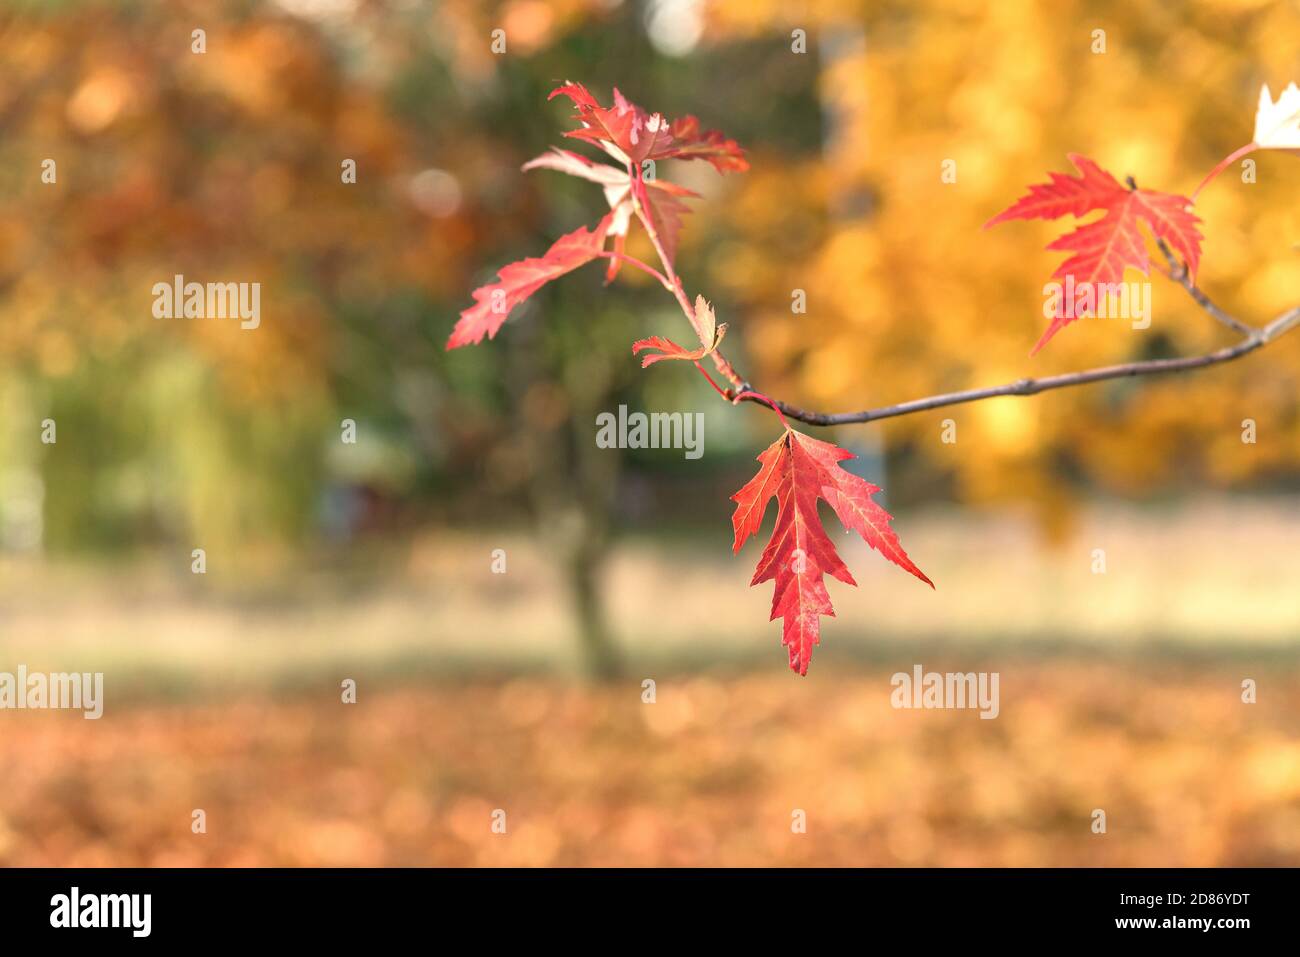 Closeup of red autumn leaf of silver maple tree Stock Photo